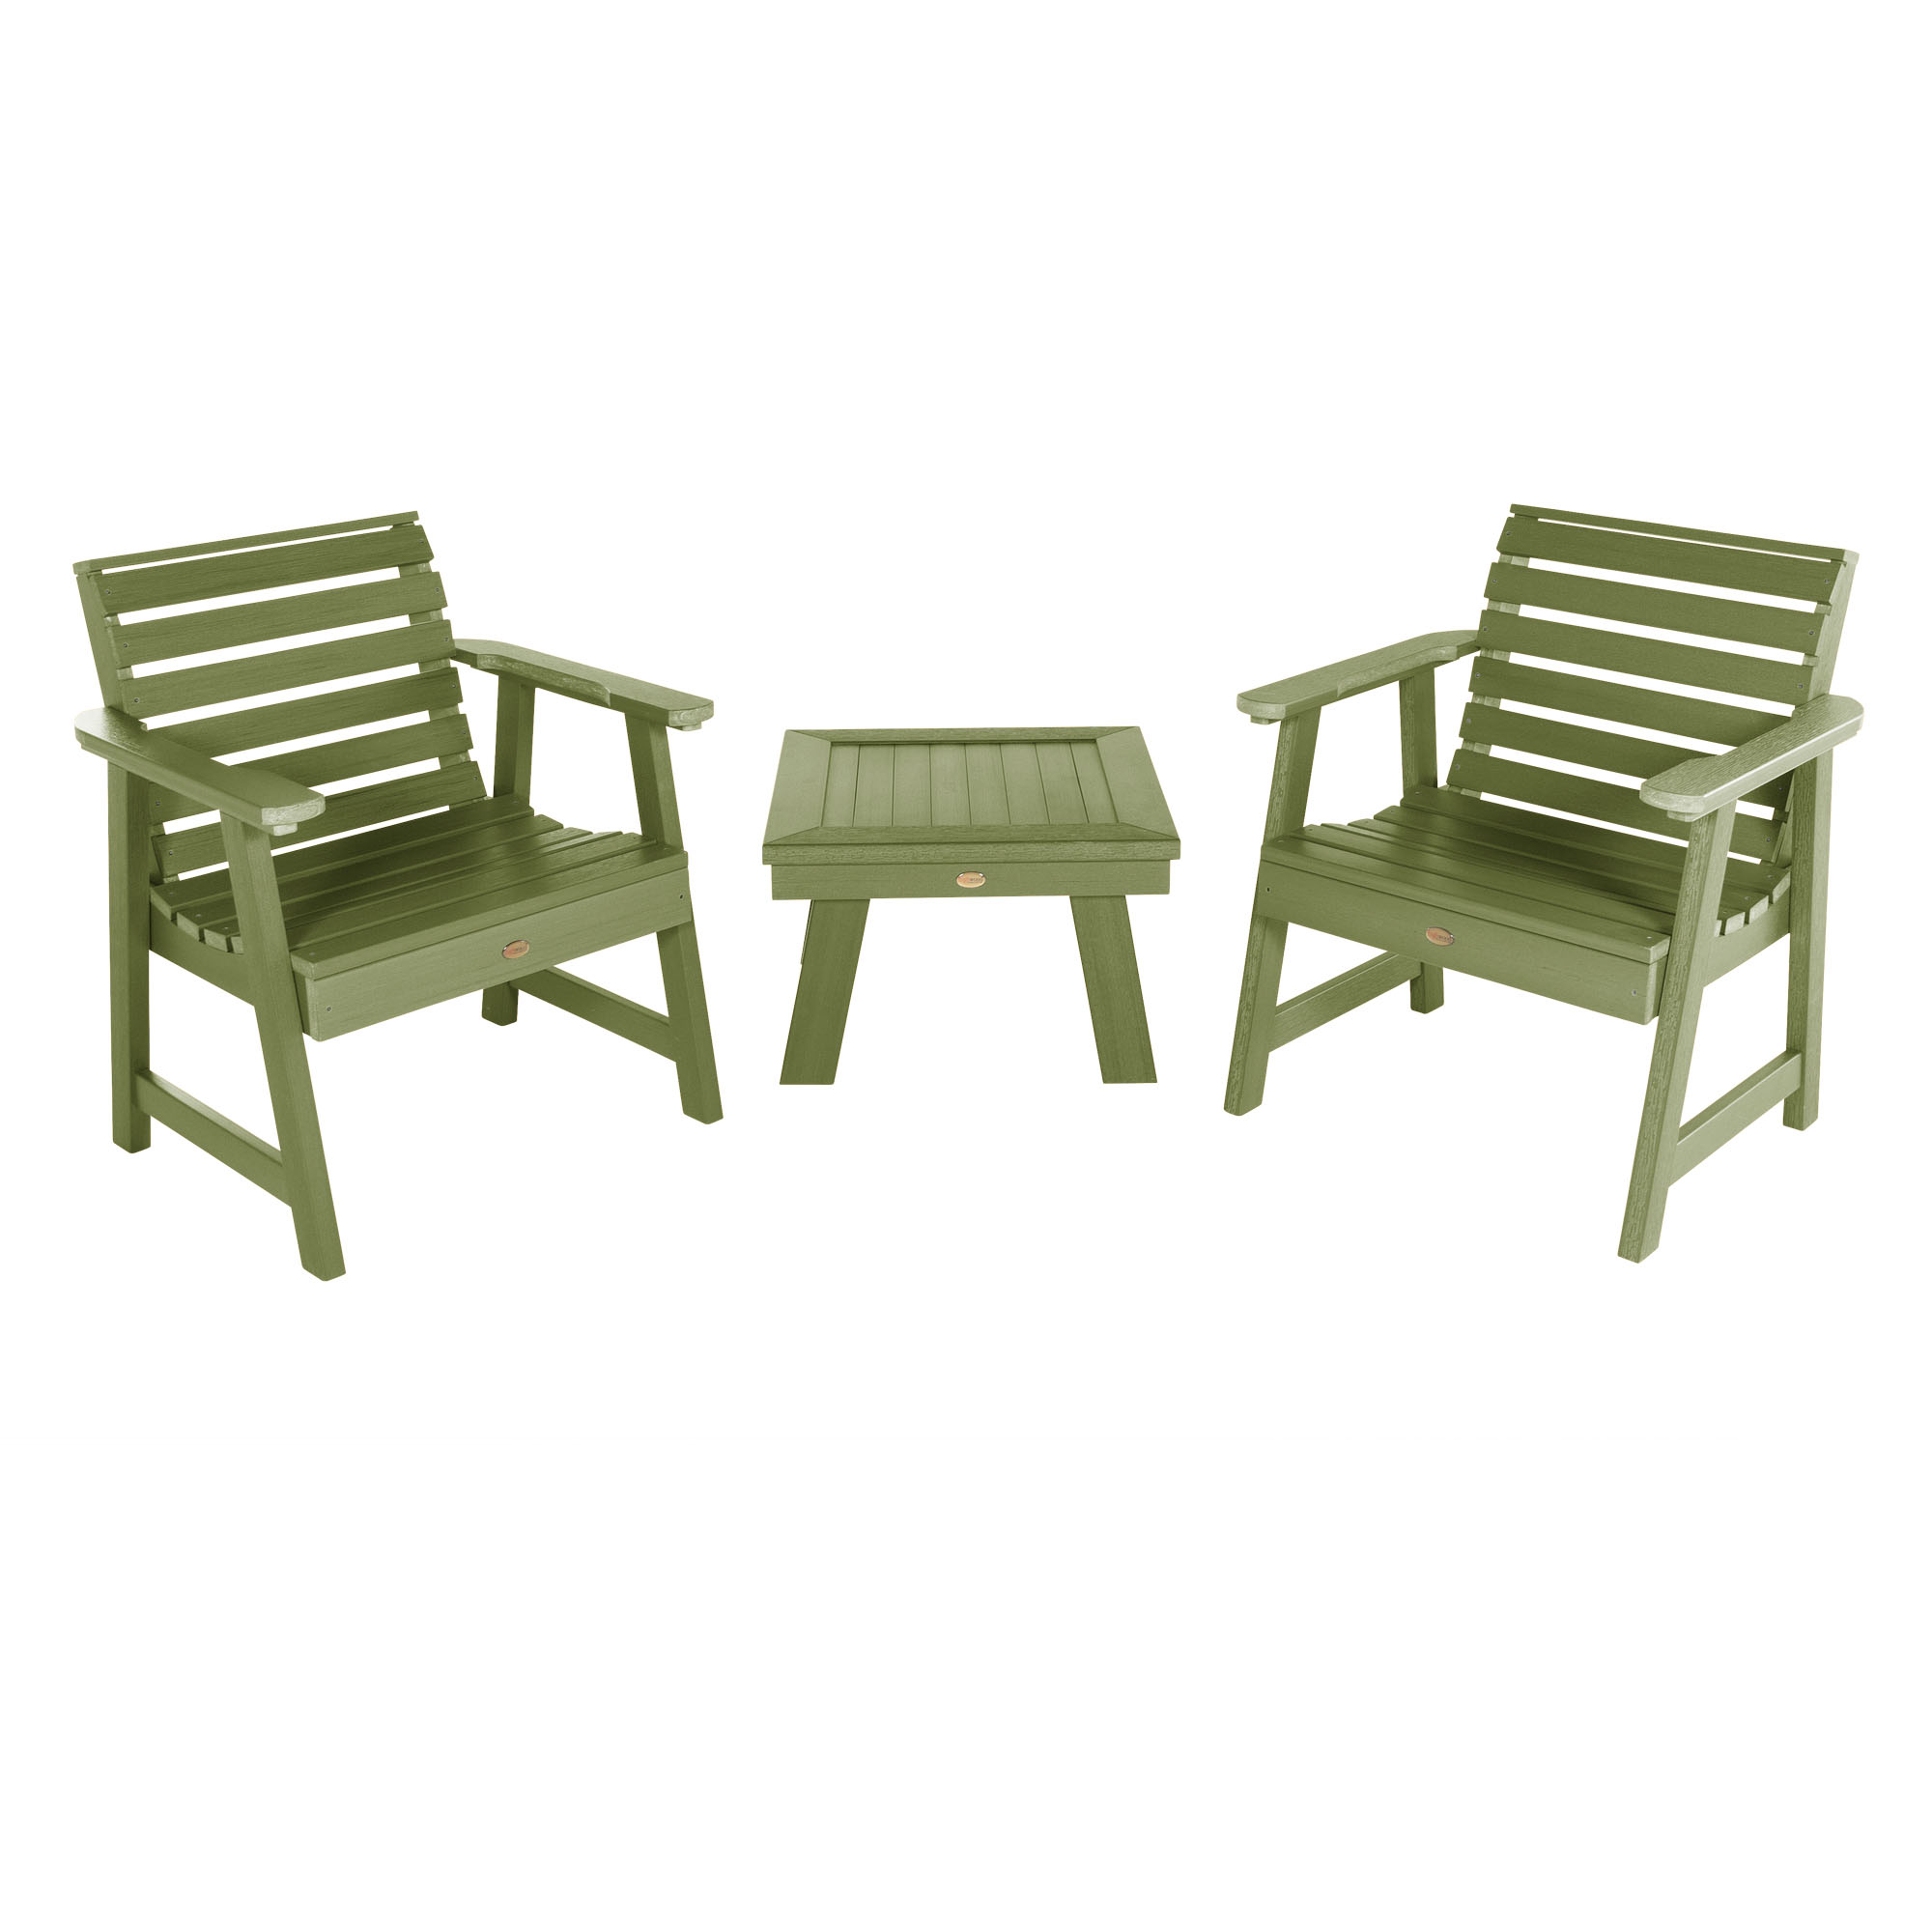 2 Weatherly Garden Chairs with 1 Square Side Table - image 1 of 2